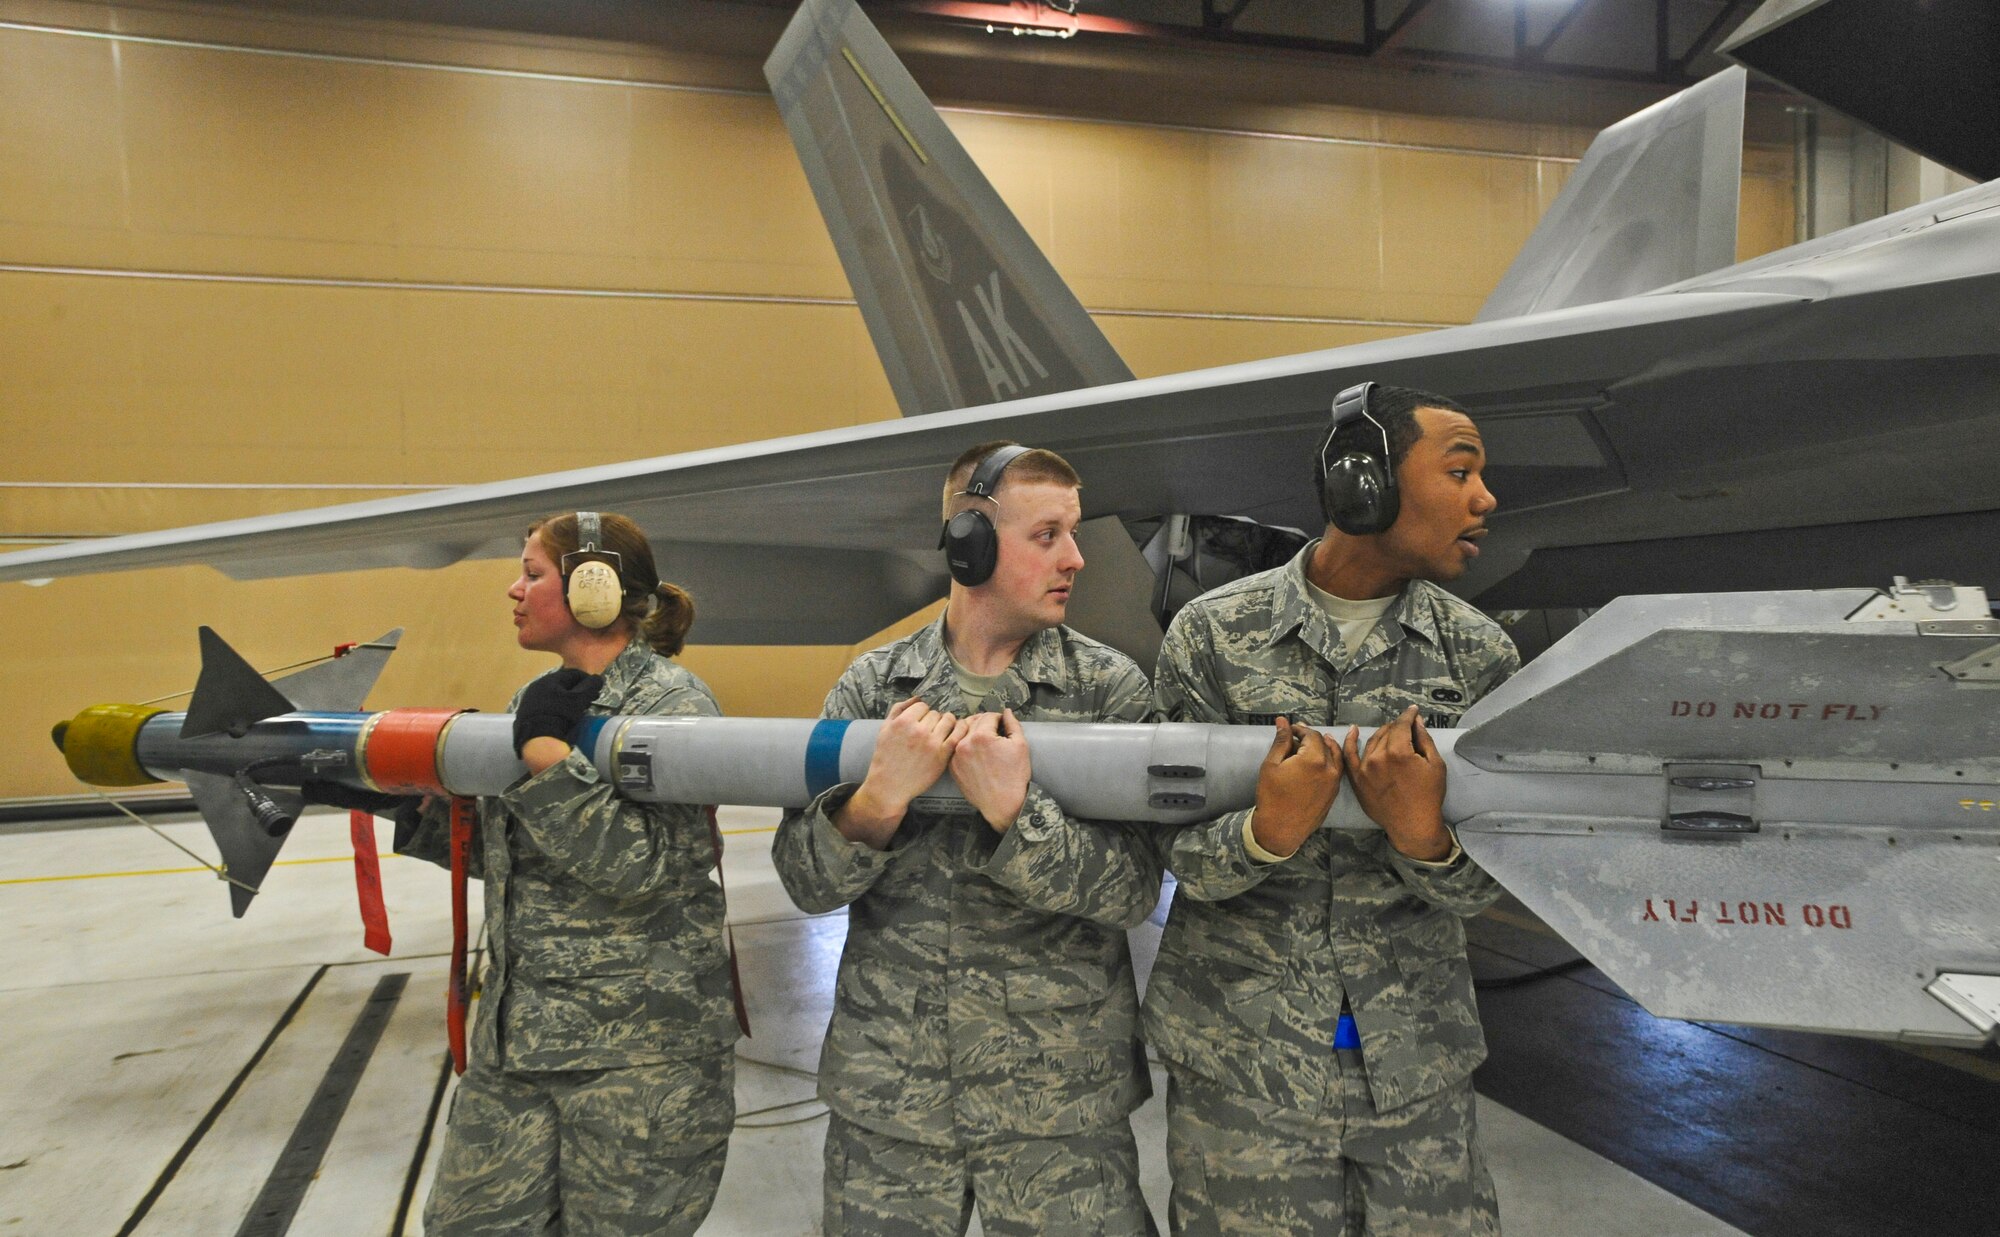 ELMENDORF AIR FORCE BASE, Alaska -- Staff Sgt. Jason Leighton, 90th Aircraft Maintenance Unit (center), prepares to load a missile onto a F-22 with his crew during a load crew inspection March 11, 2009. Leighton is a 2009 Lt. Gen. Leo Marquez Award winner in the Munitions/Missile Technician Supervisor Category. The Marquez Award is one of the hightest honors for a maintainer at Air Force level. (U.S. Air Force photo/ Senior Airman Matthew Owens)